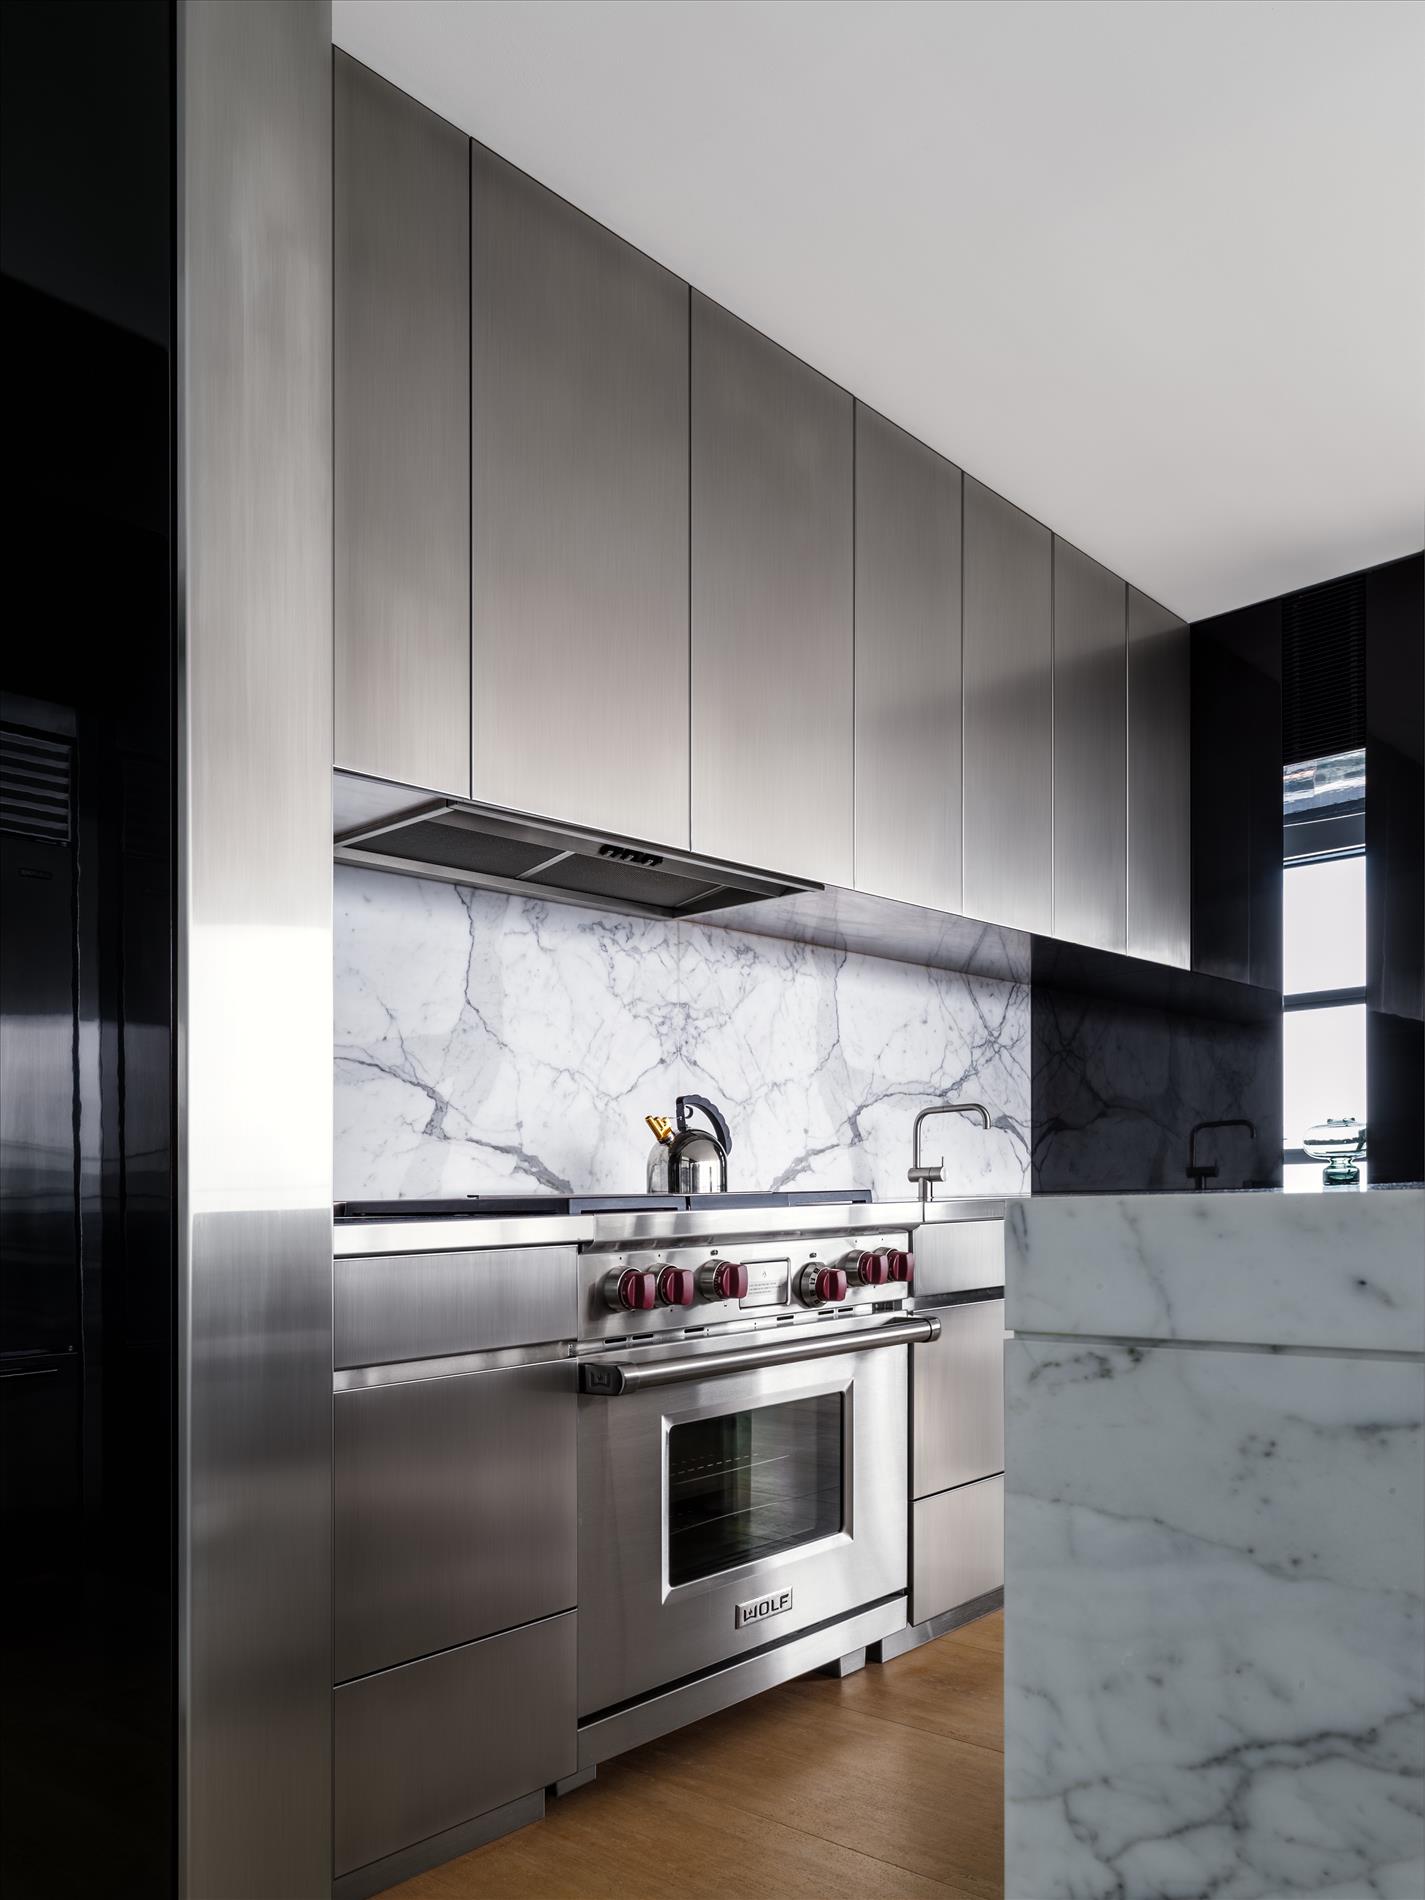 Calacatta marble and reflective surfaces round out the material palette.